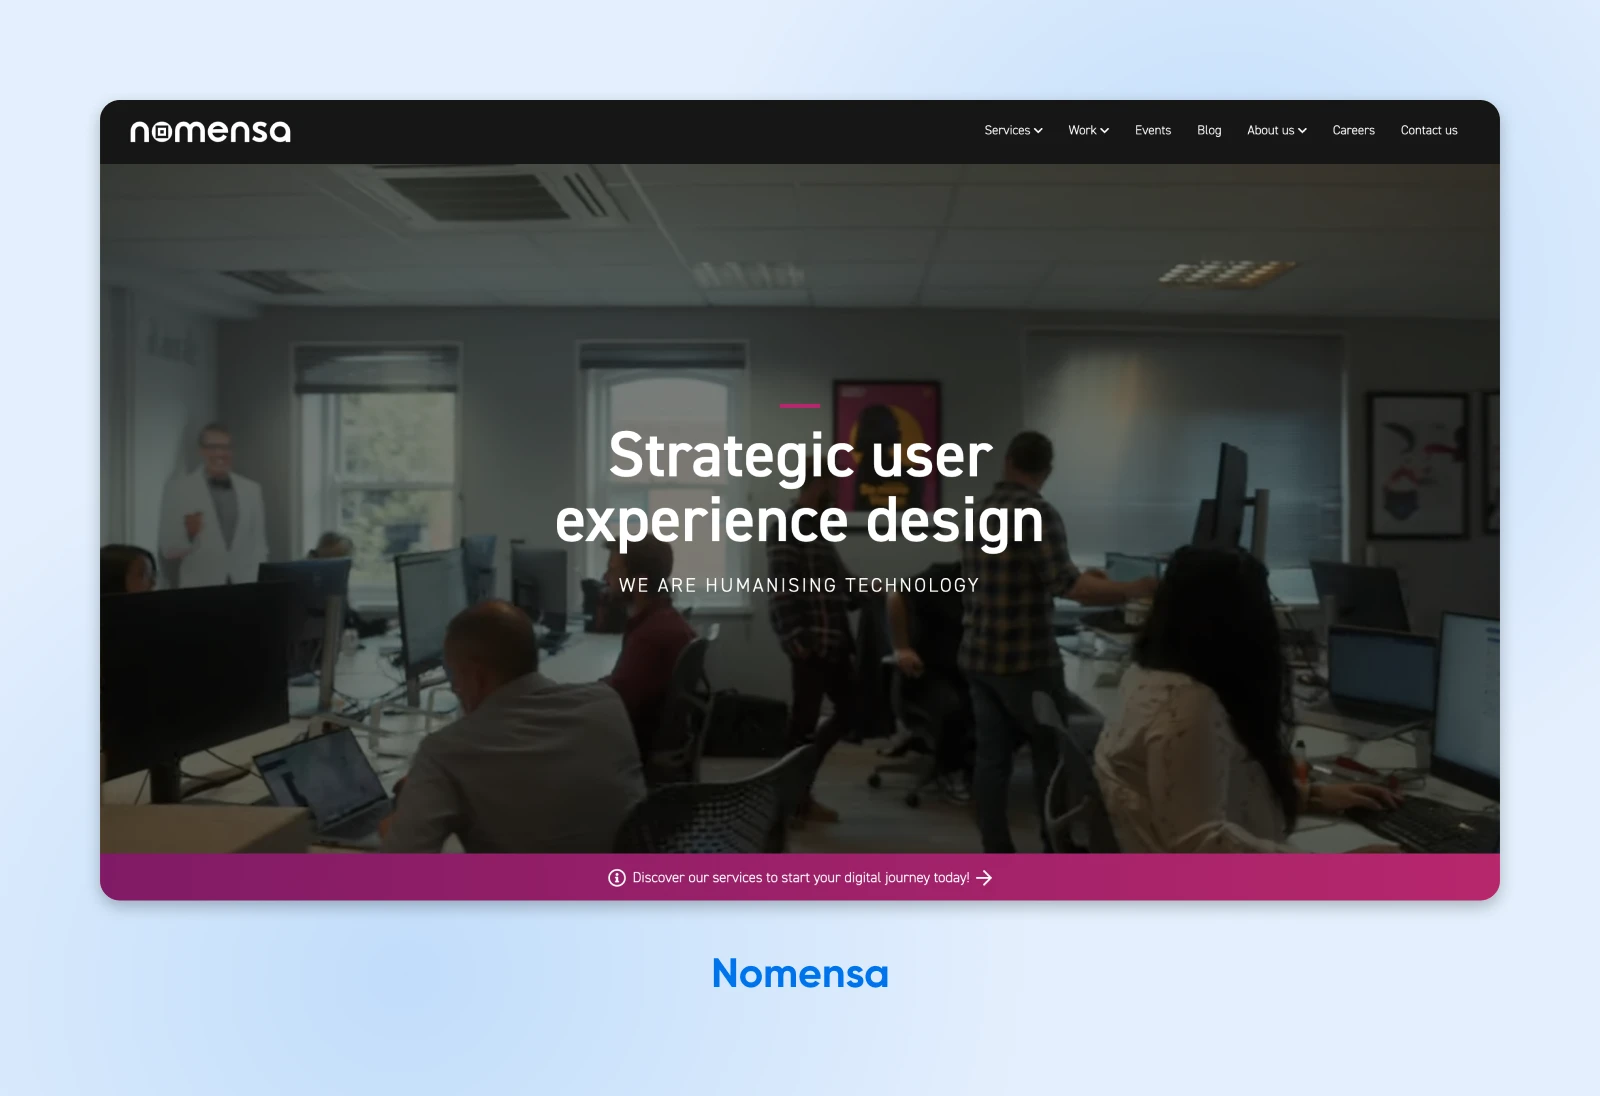 Nomensa's landing page with the header "Strategic user experience design" overlain on a photo of people in the office.